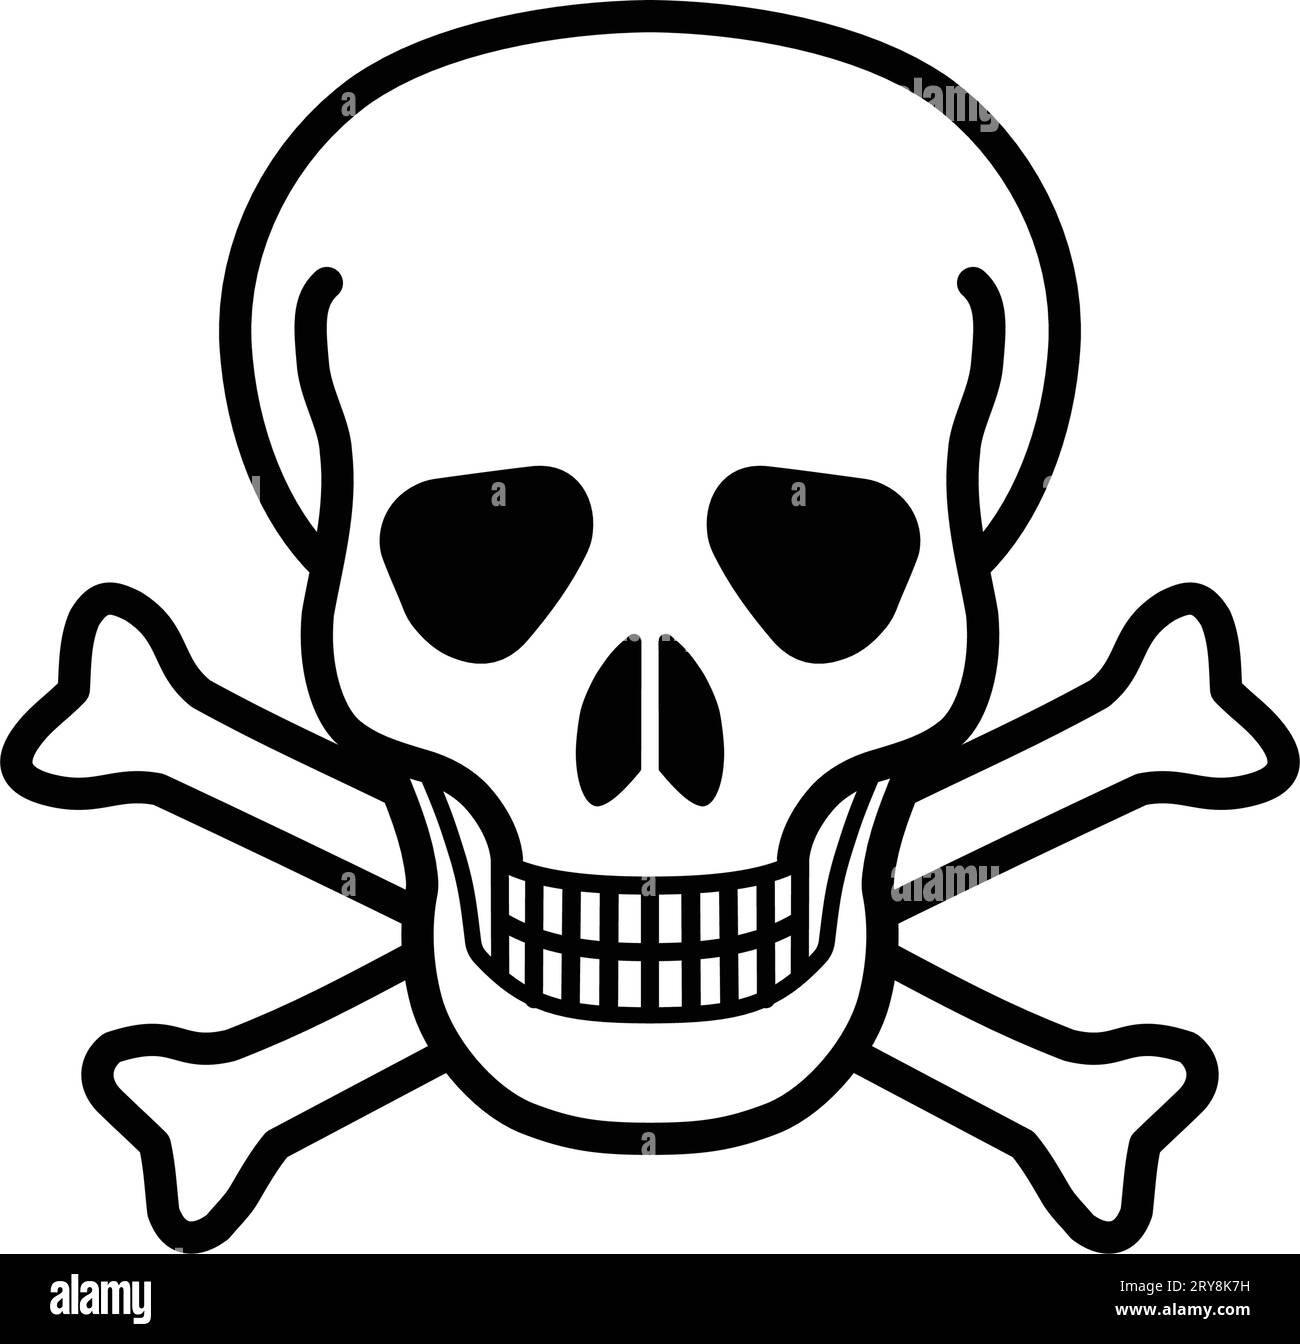 classic poison death skull and crossbones symbol silhouette isolated on white background vector Stock Vector